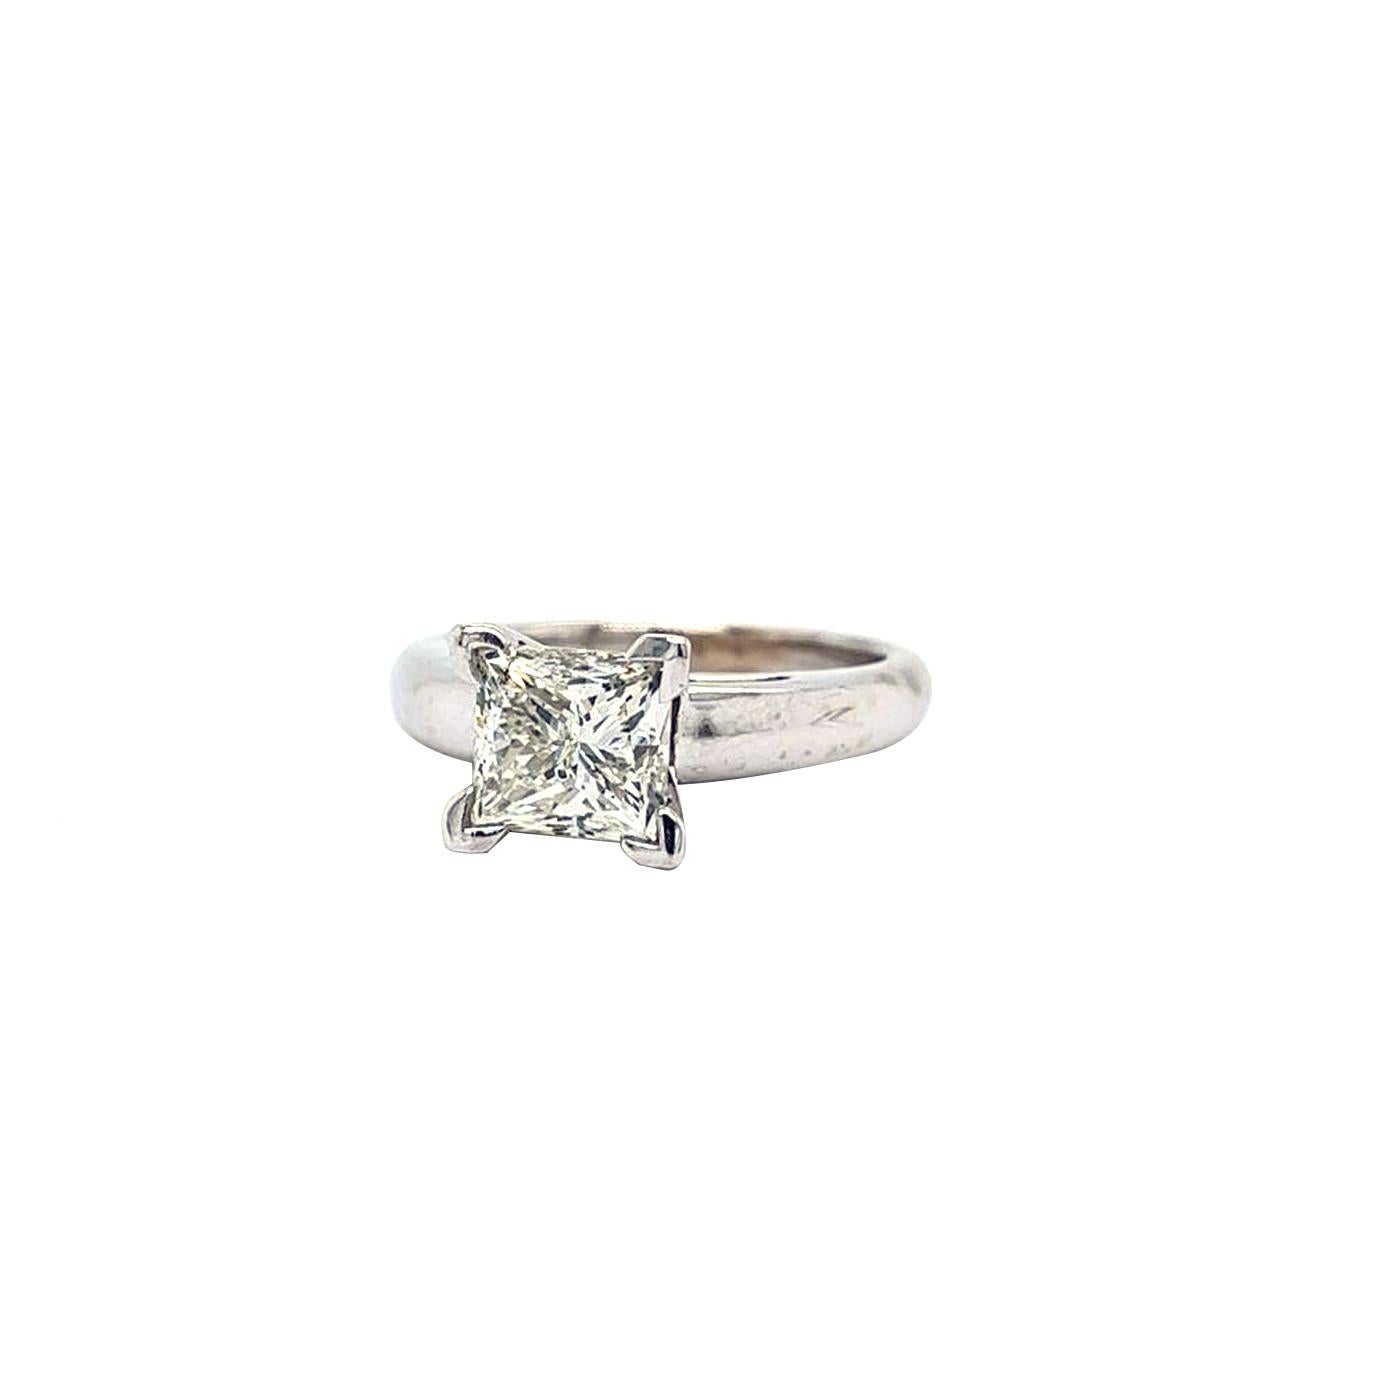 2.03 Carat Princess Cut Solitaire Diamond Engagement Ring 4 Prong 14k White Gold For Sale 1